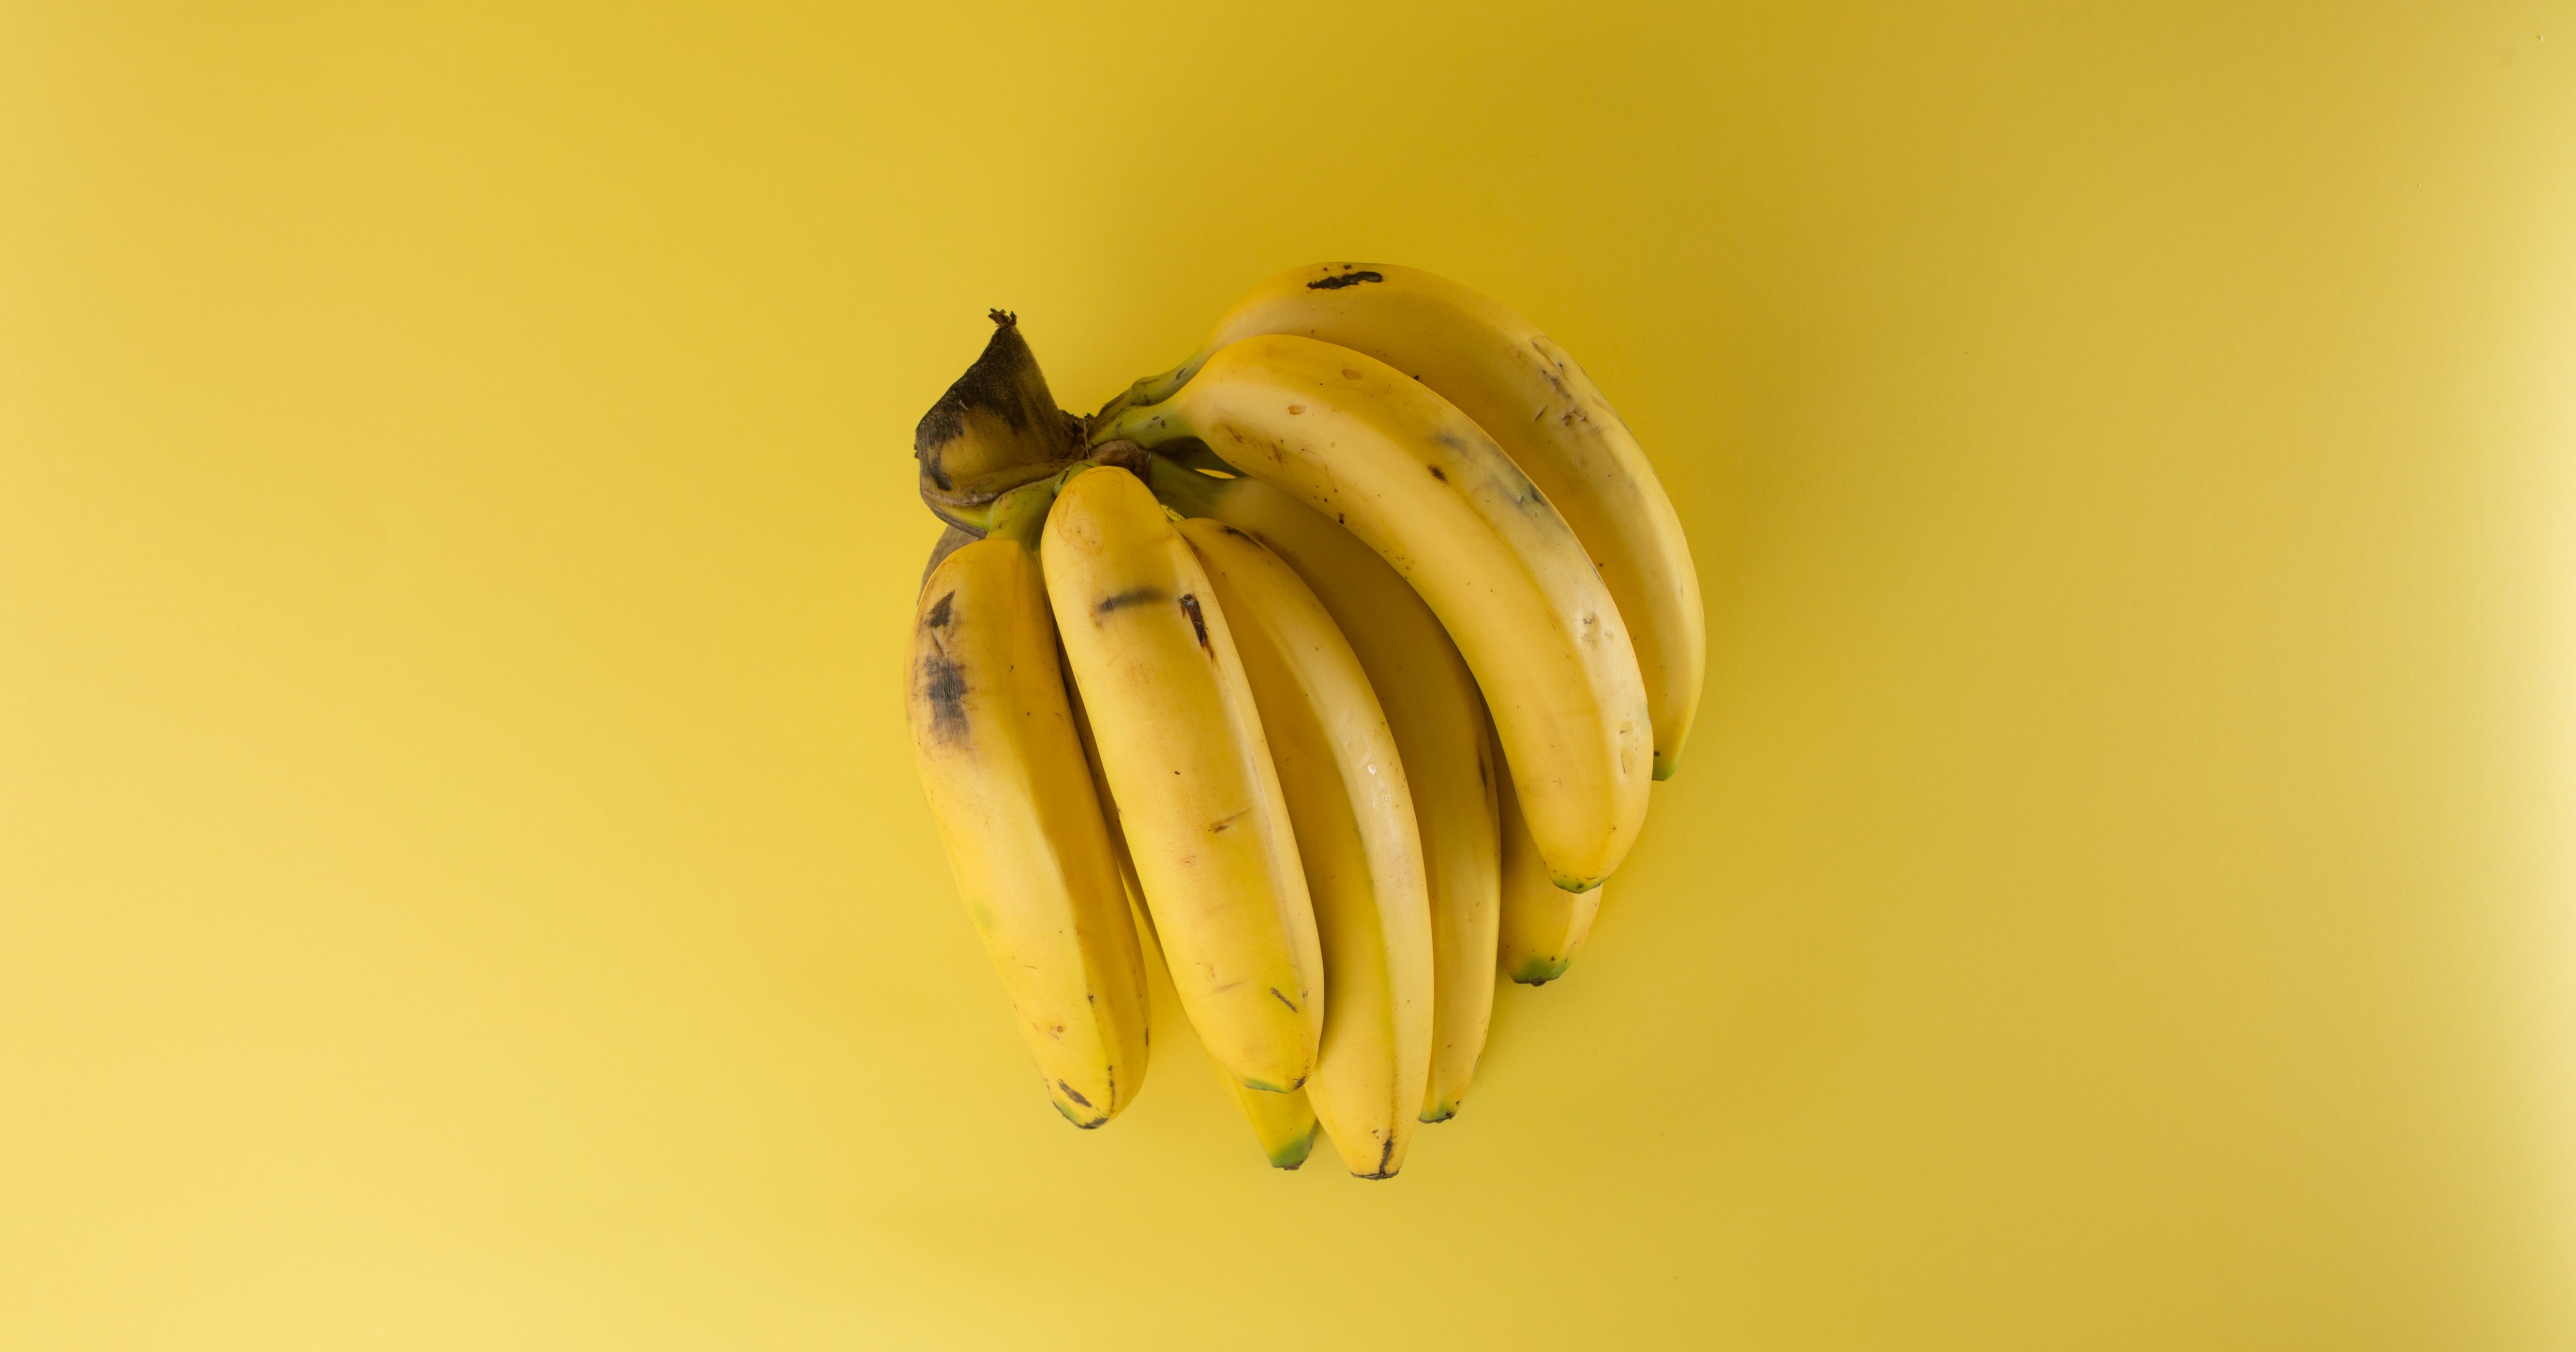 home - How Bad are Bananas?